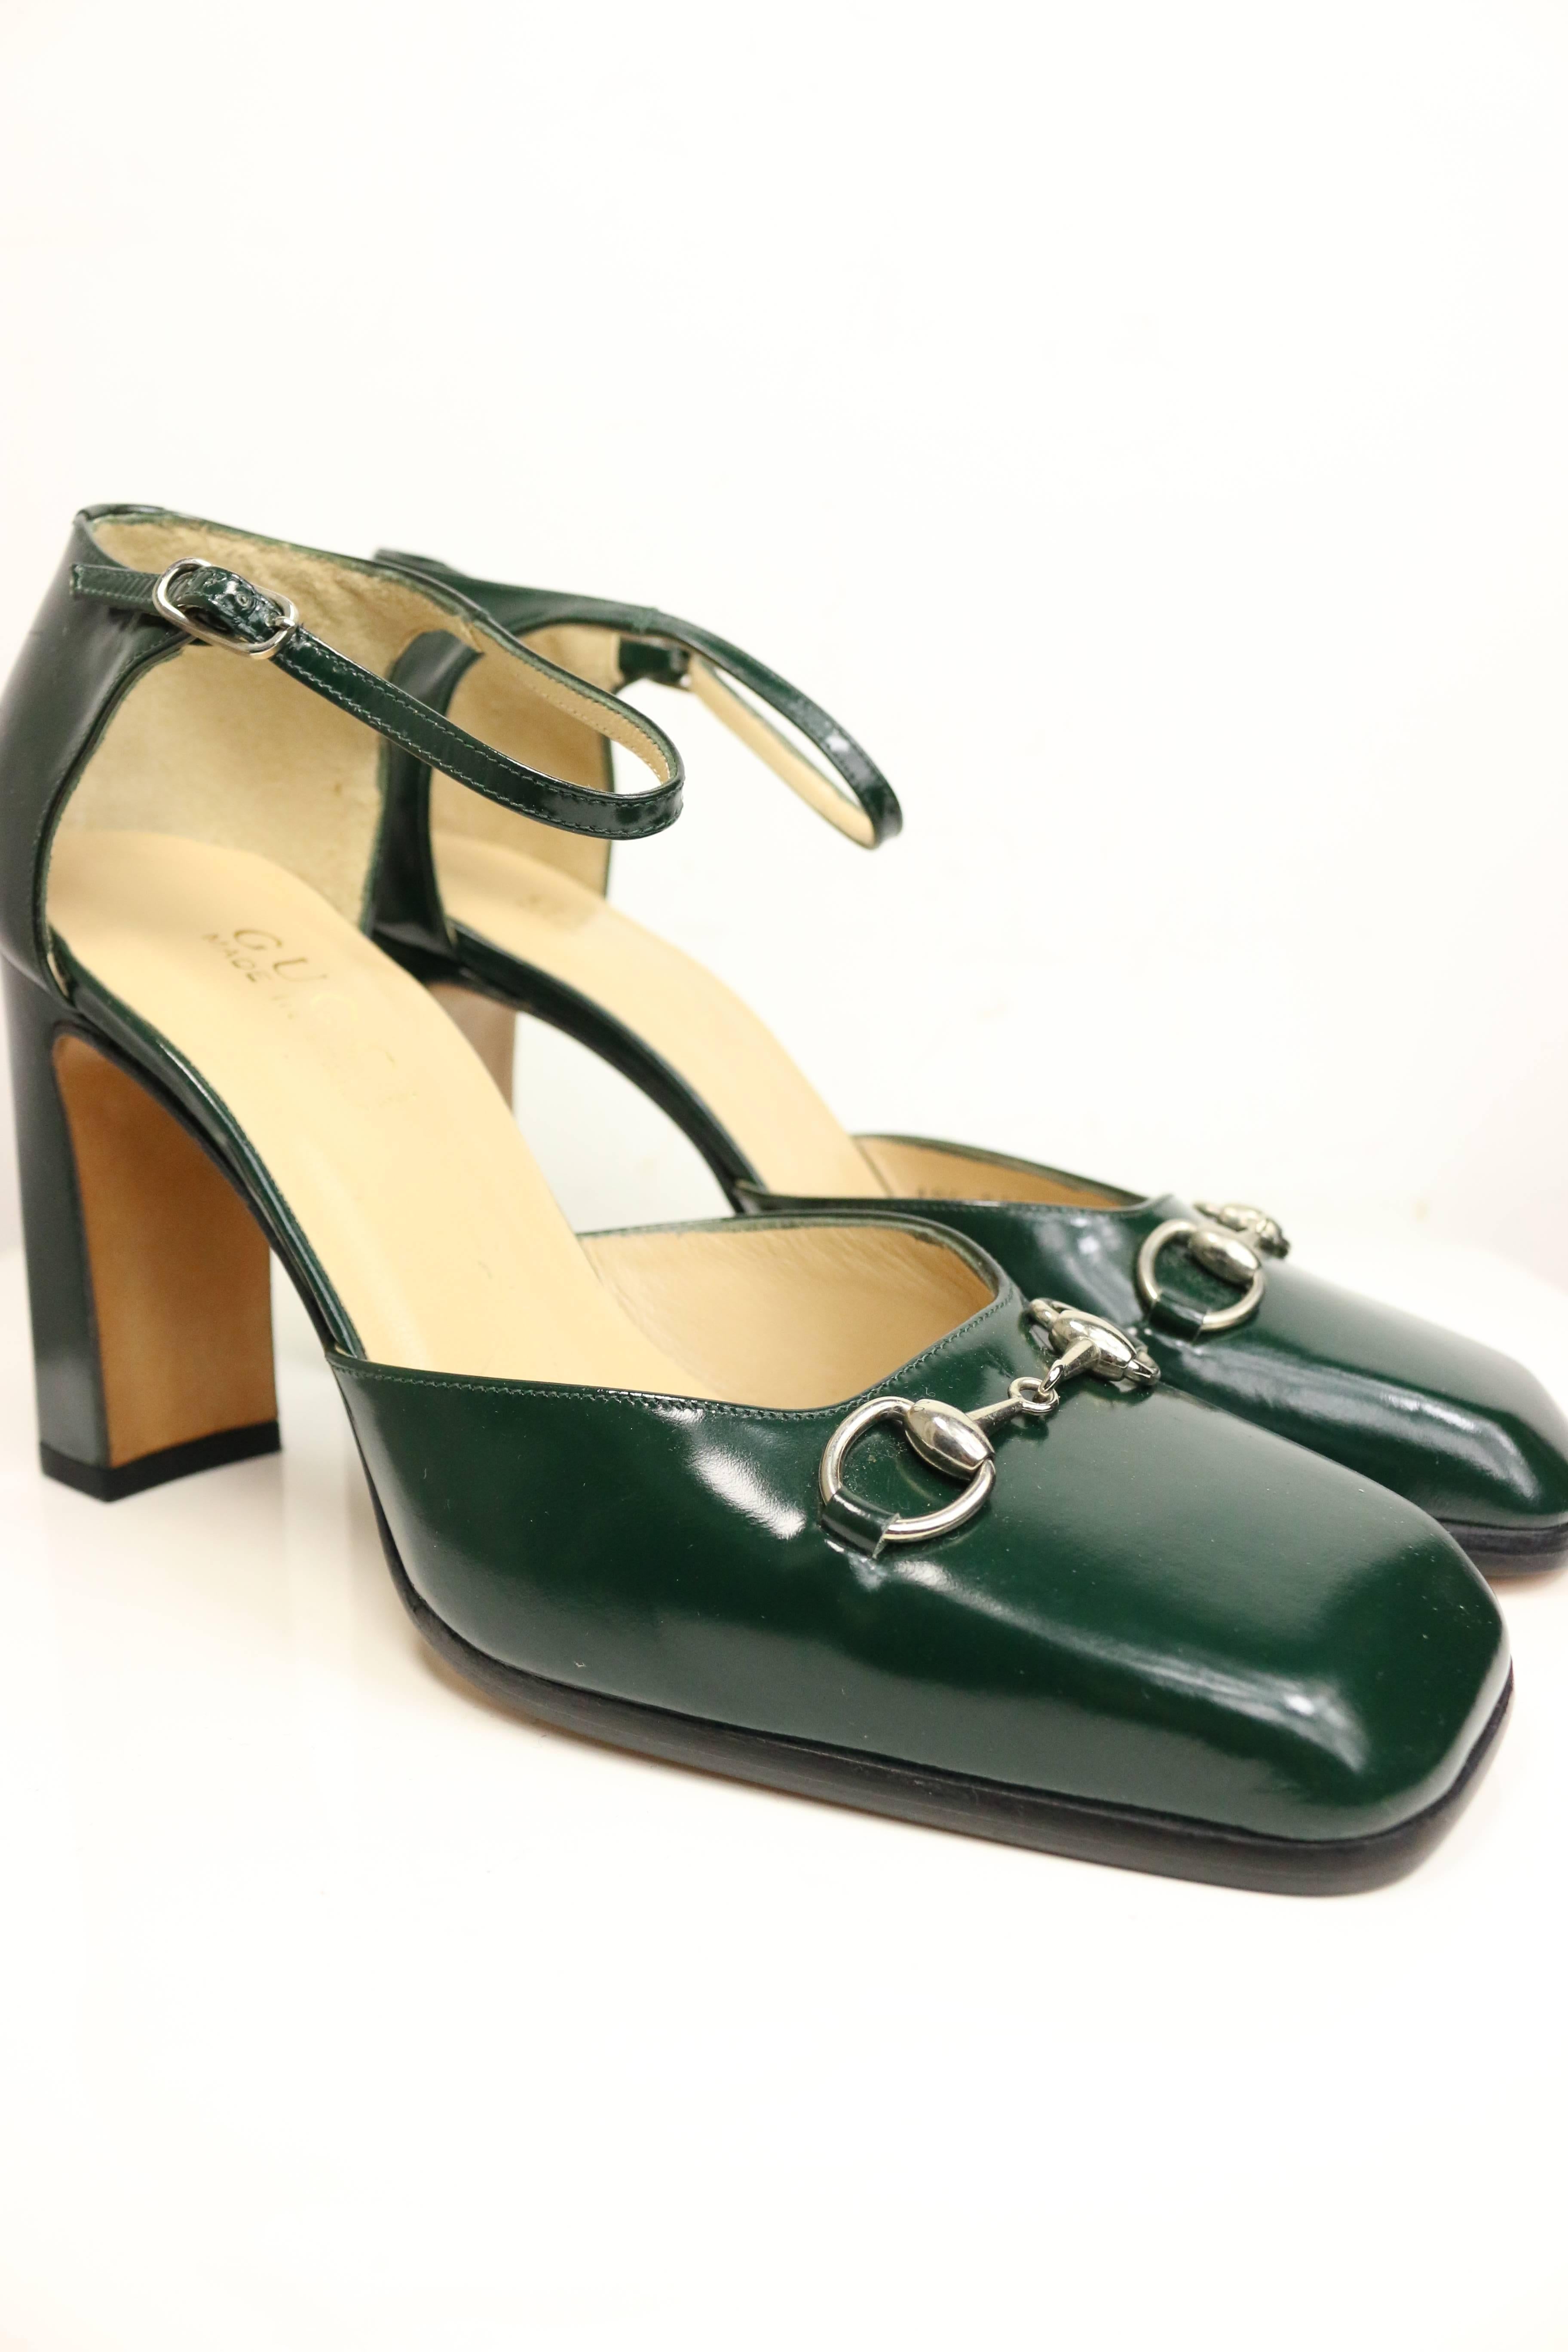 - Gucci by Tom Ford classic green leather square toe pumps with strap. 

- Featuring Gucci classic and signature silver toned hardware horsebit. 

- Rectangle high heels. 

- Made in Italy. 

- Size 37.5. 
